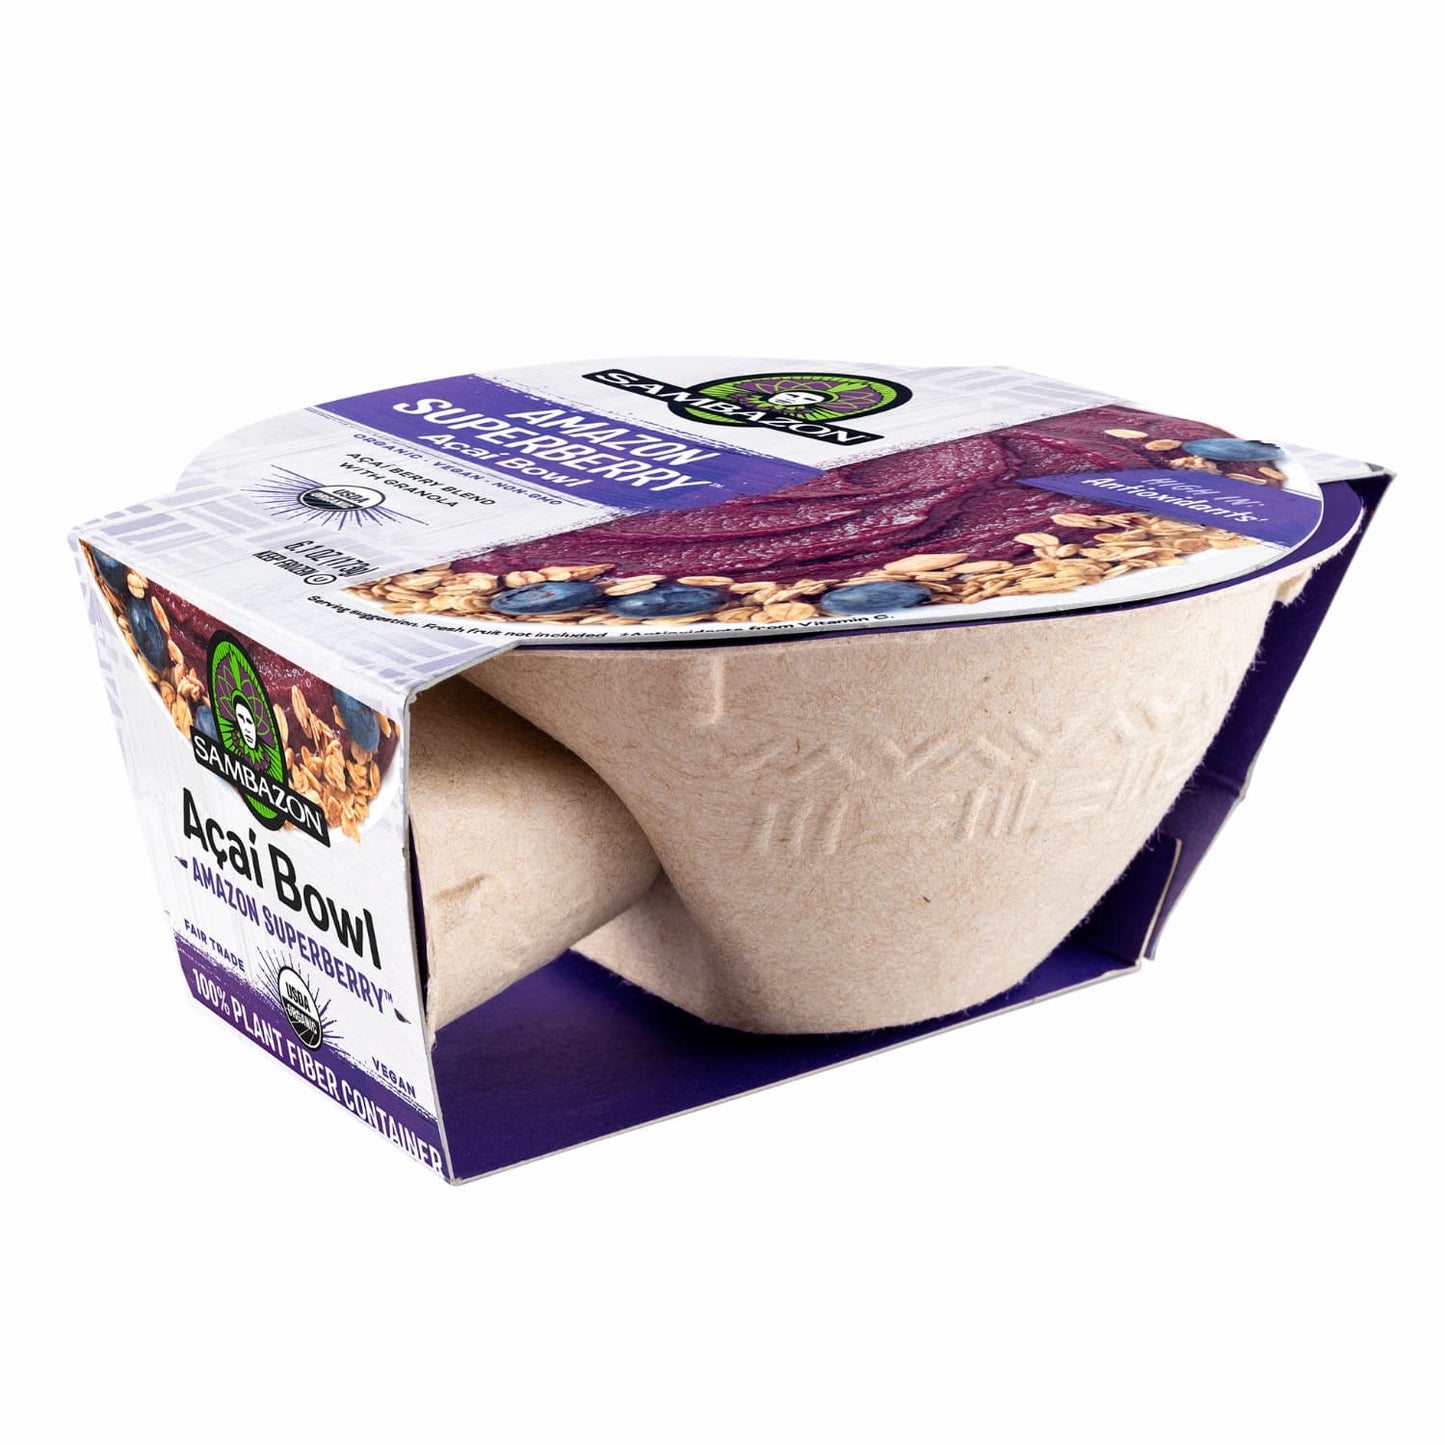 acai bowl calories and nutritional facts on packaging